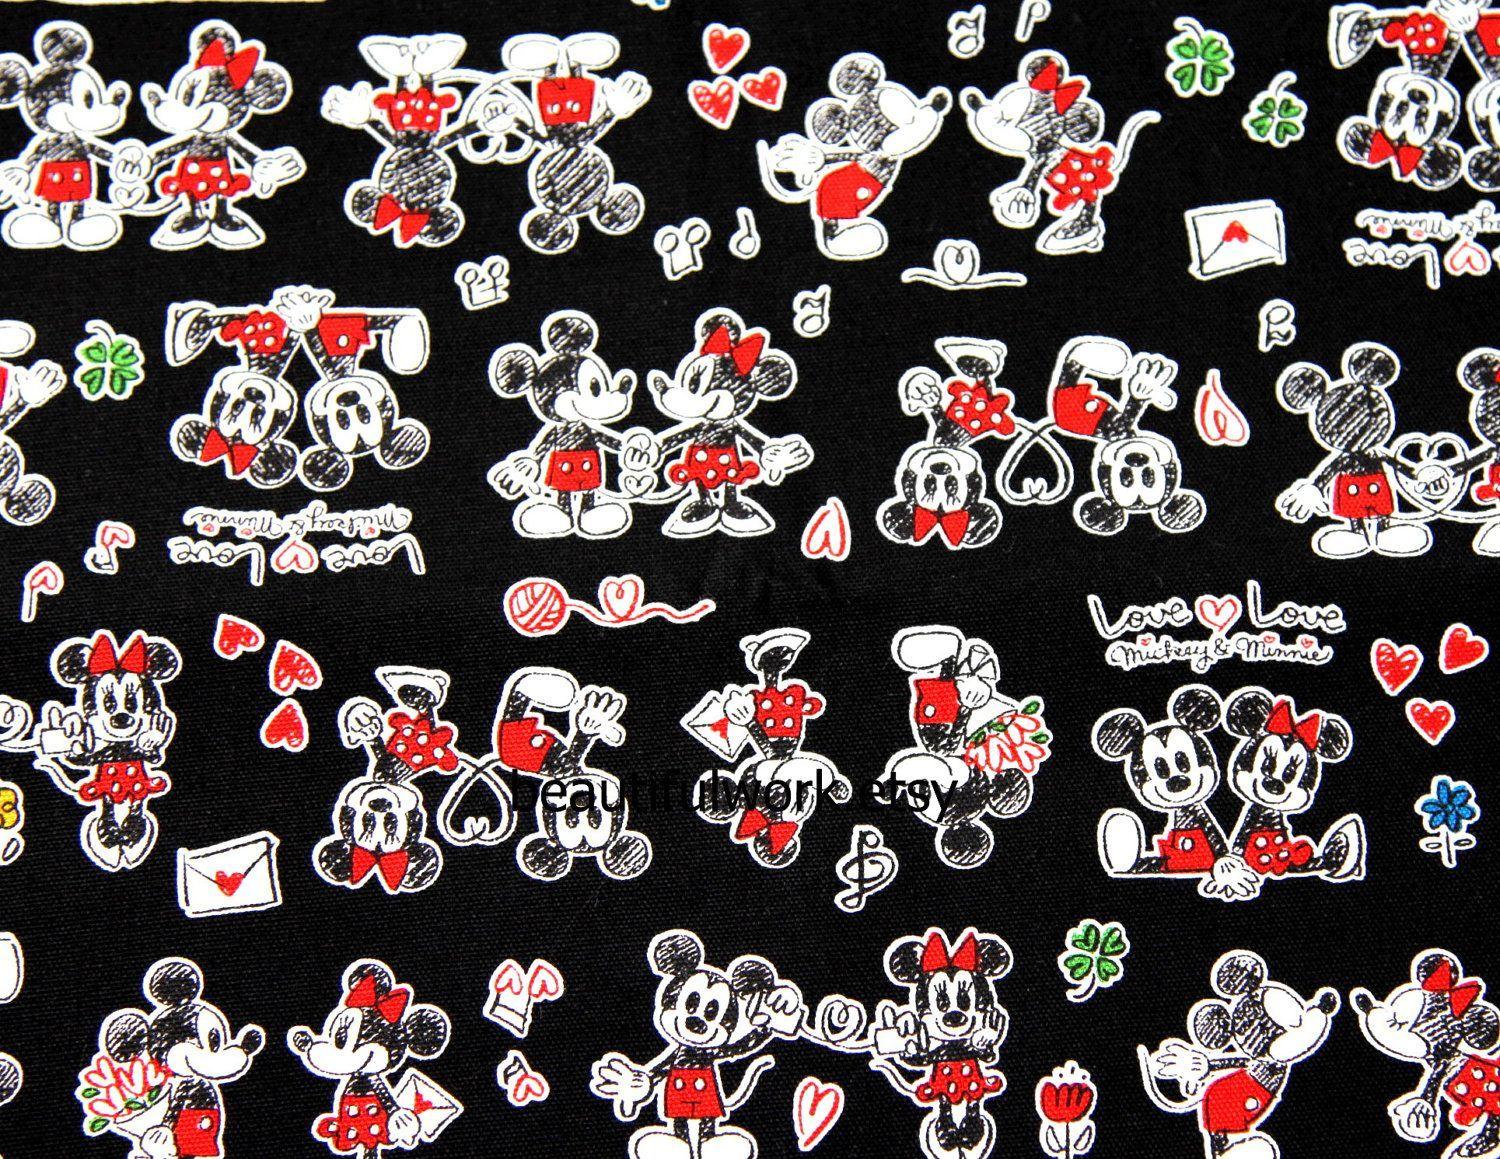 Disney Cartoon Mickey Mouse and Minnie Mouse Print Japanese fabric